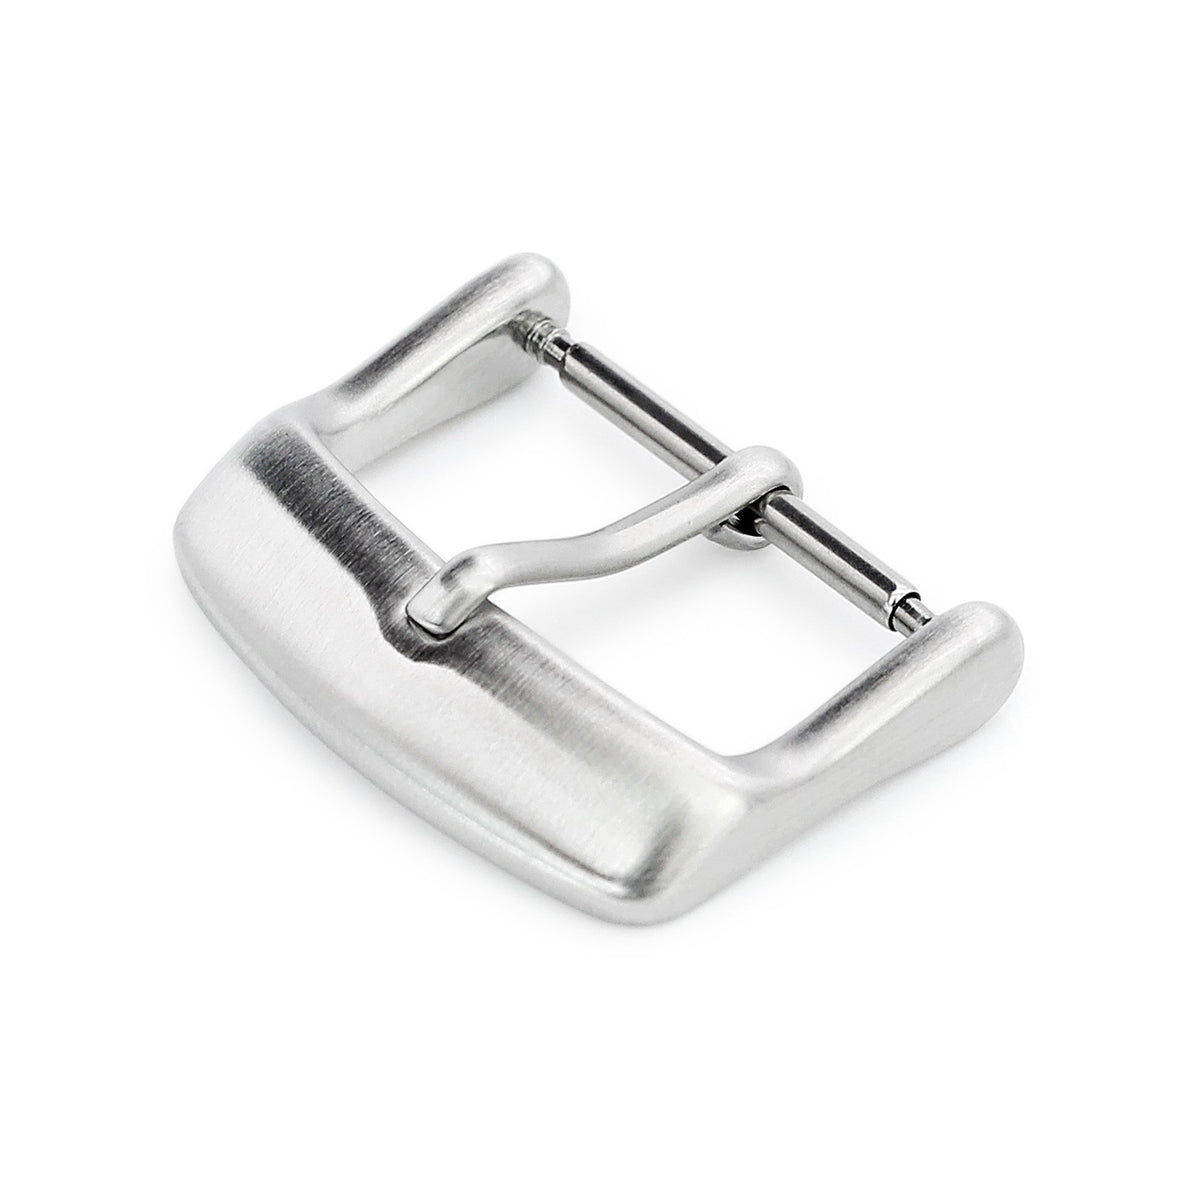 18mm 20mm #64 Sporty Tang Buckle for Leather Watch Strap Brushed Strapcode Buckles